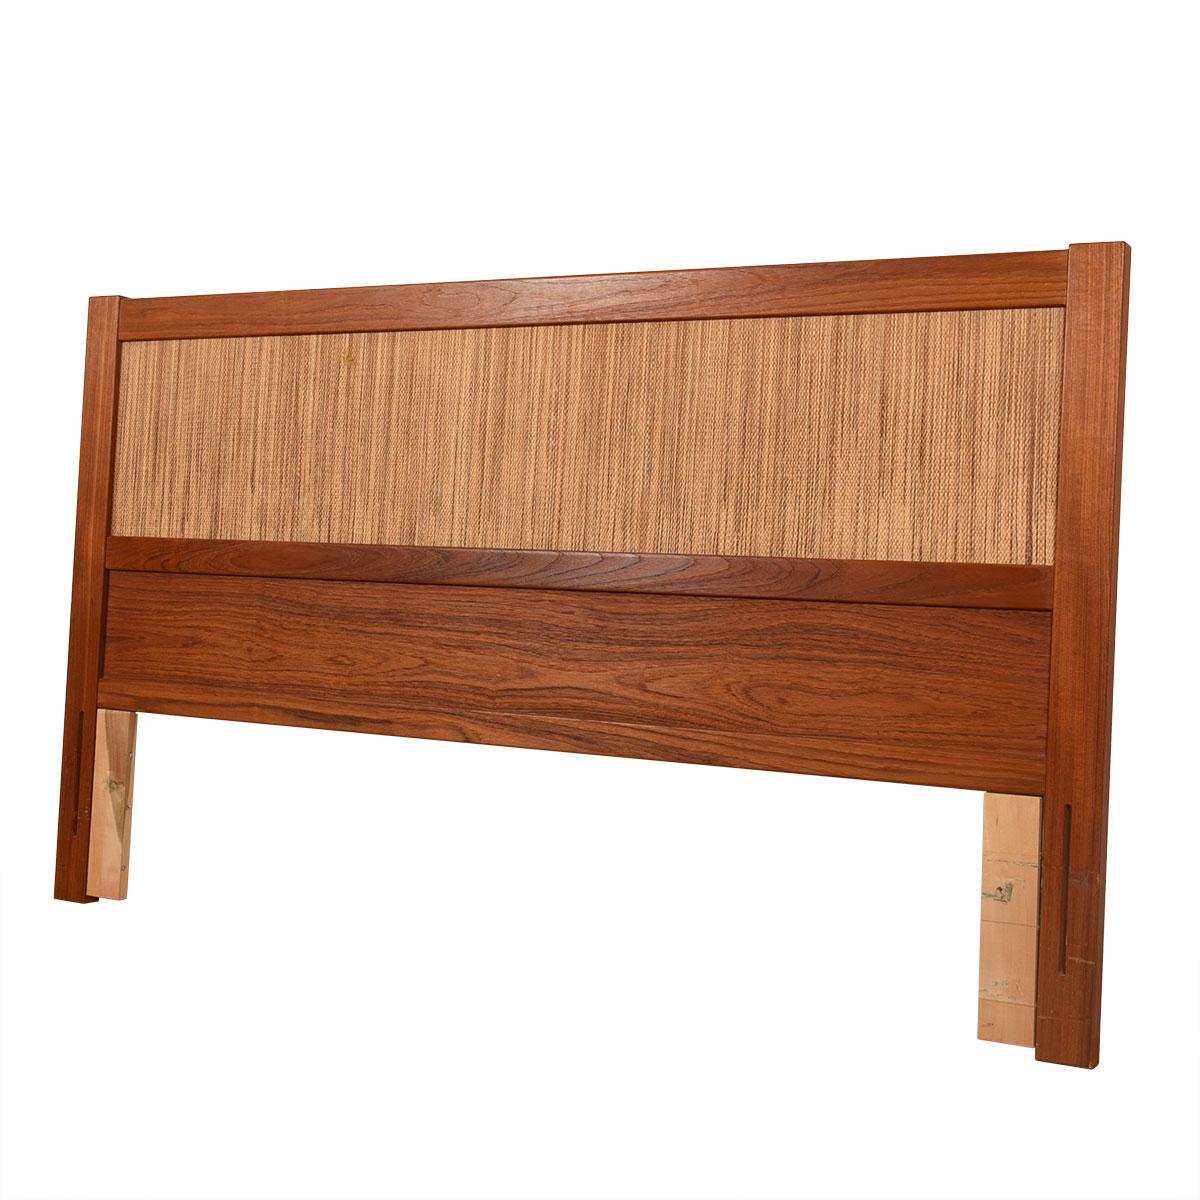 Lovely & versatile Danish Modern headboard features beautiful caning in a teak frame on one side, and solid teak on the other.

Feeling summery and casual — use the caned side for a breezy, classic look.
Feeling cozy and ready for some hygge — keep